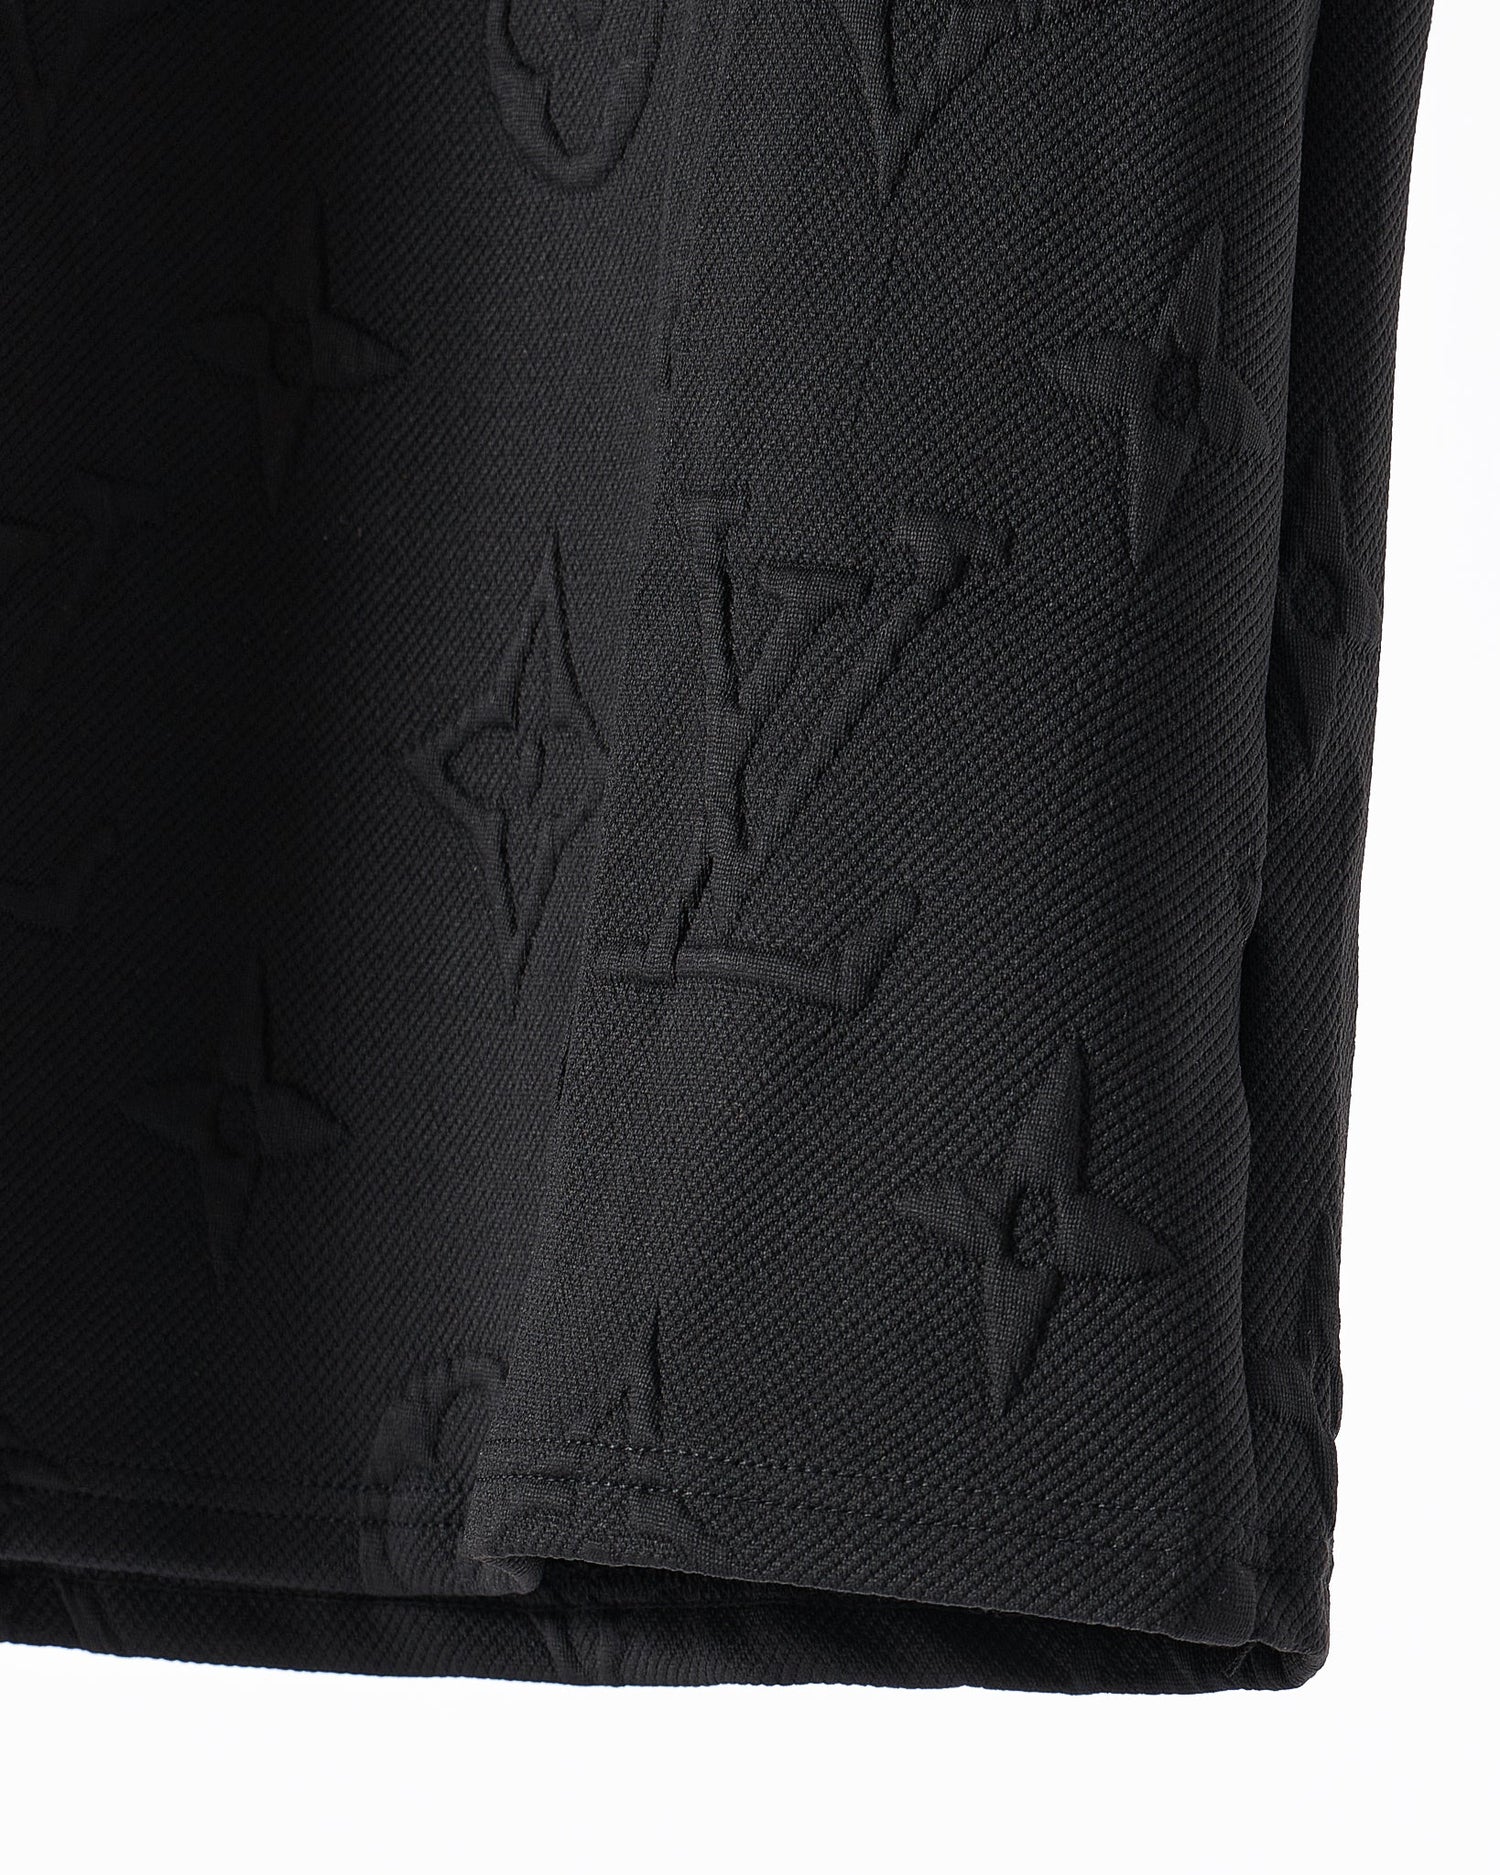 MOI OUTFIT-LV Monogram Lady Embossed Black Dress 59.90